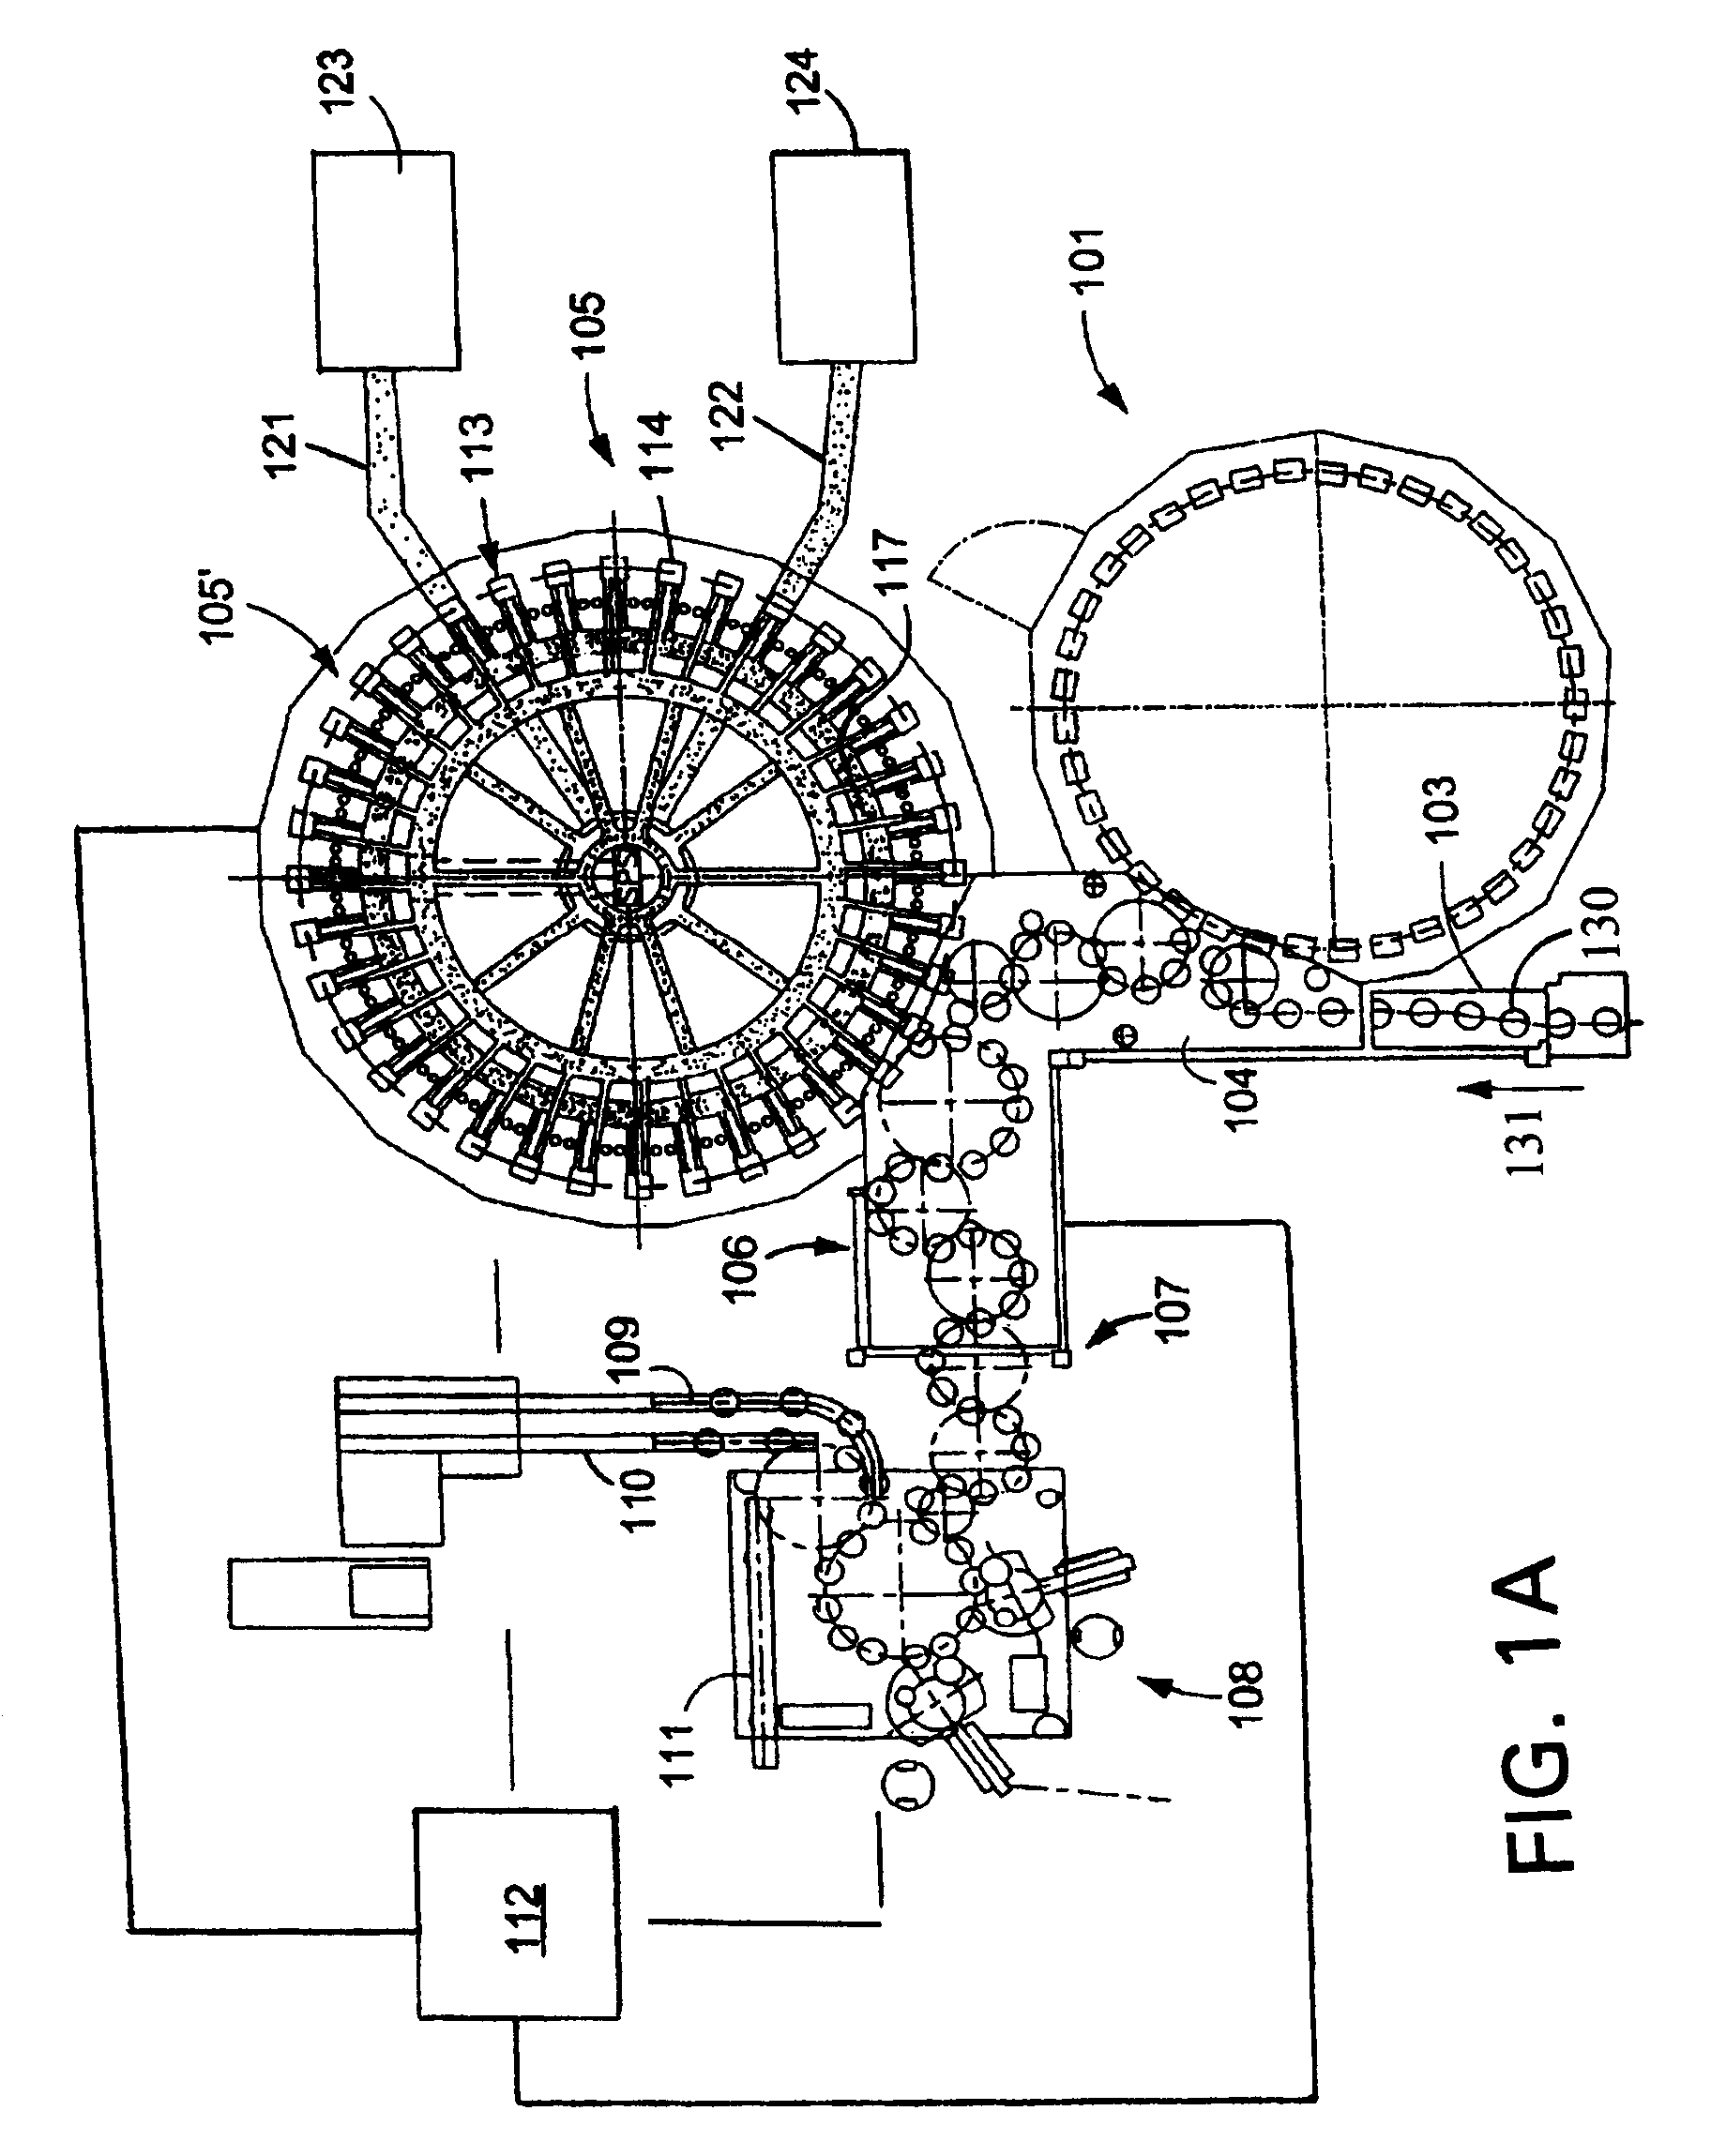 Beverage bottling plant having an apparatus for the treatment of bottles or similar containers, and a method and apparatus for the treatment of bottles or similar containers